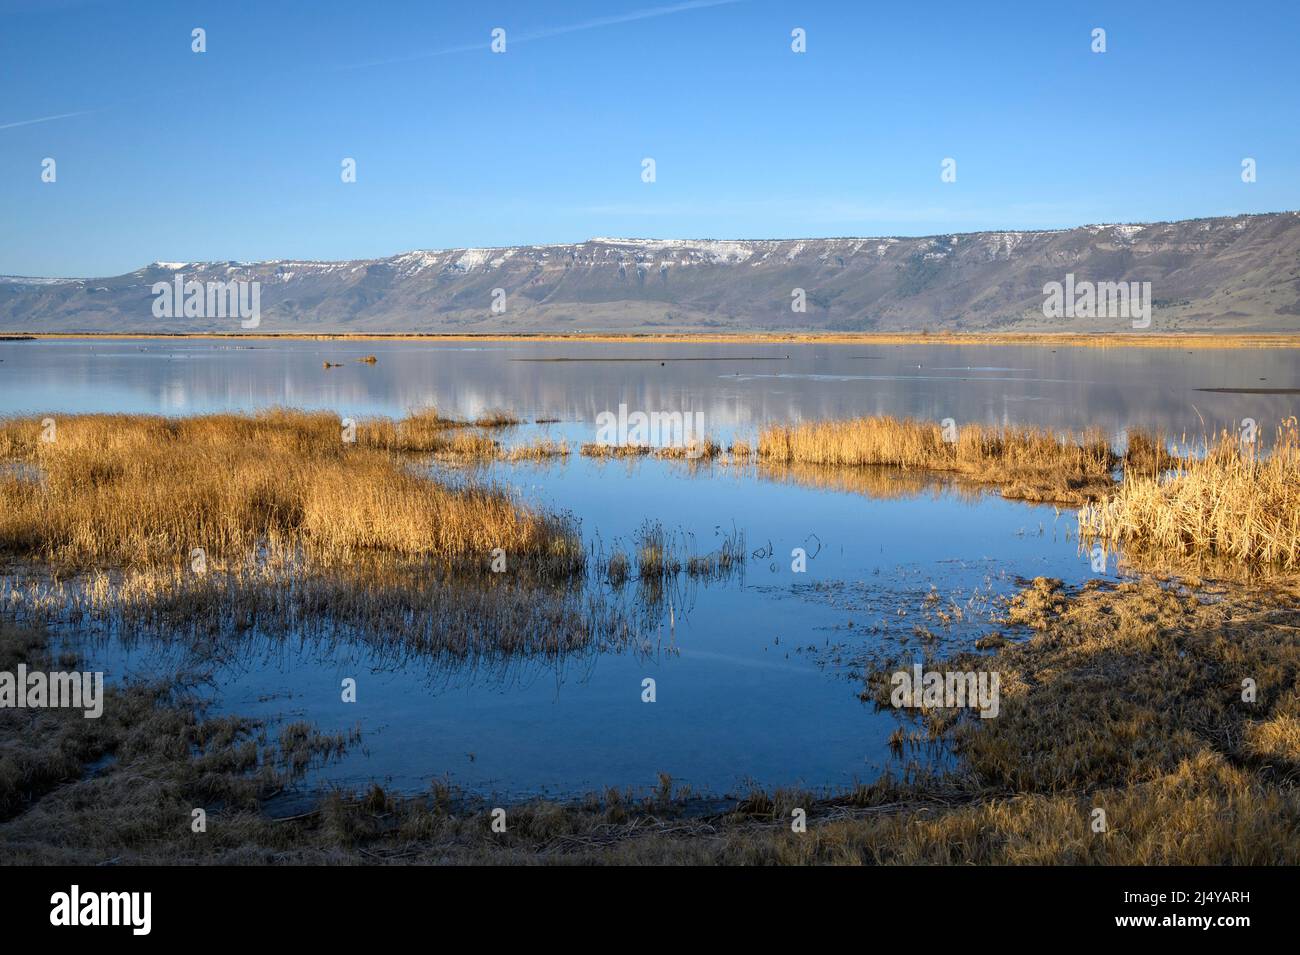 Summer Lake Wildlife Area and Winter Rim in southern Oregon. Stock Photo